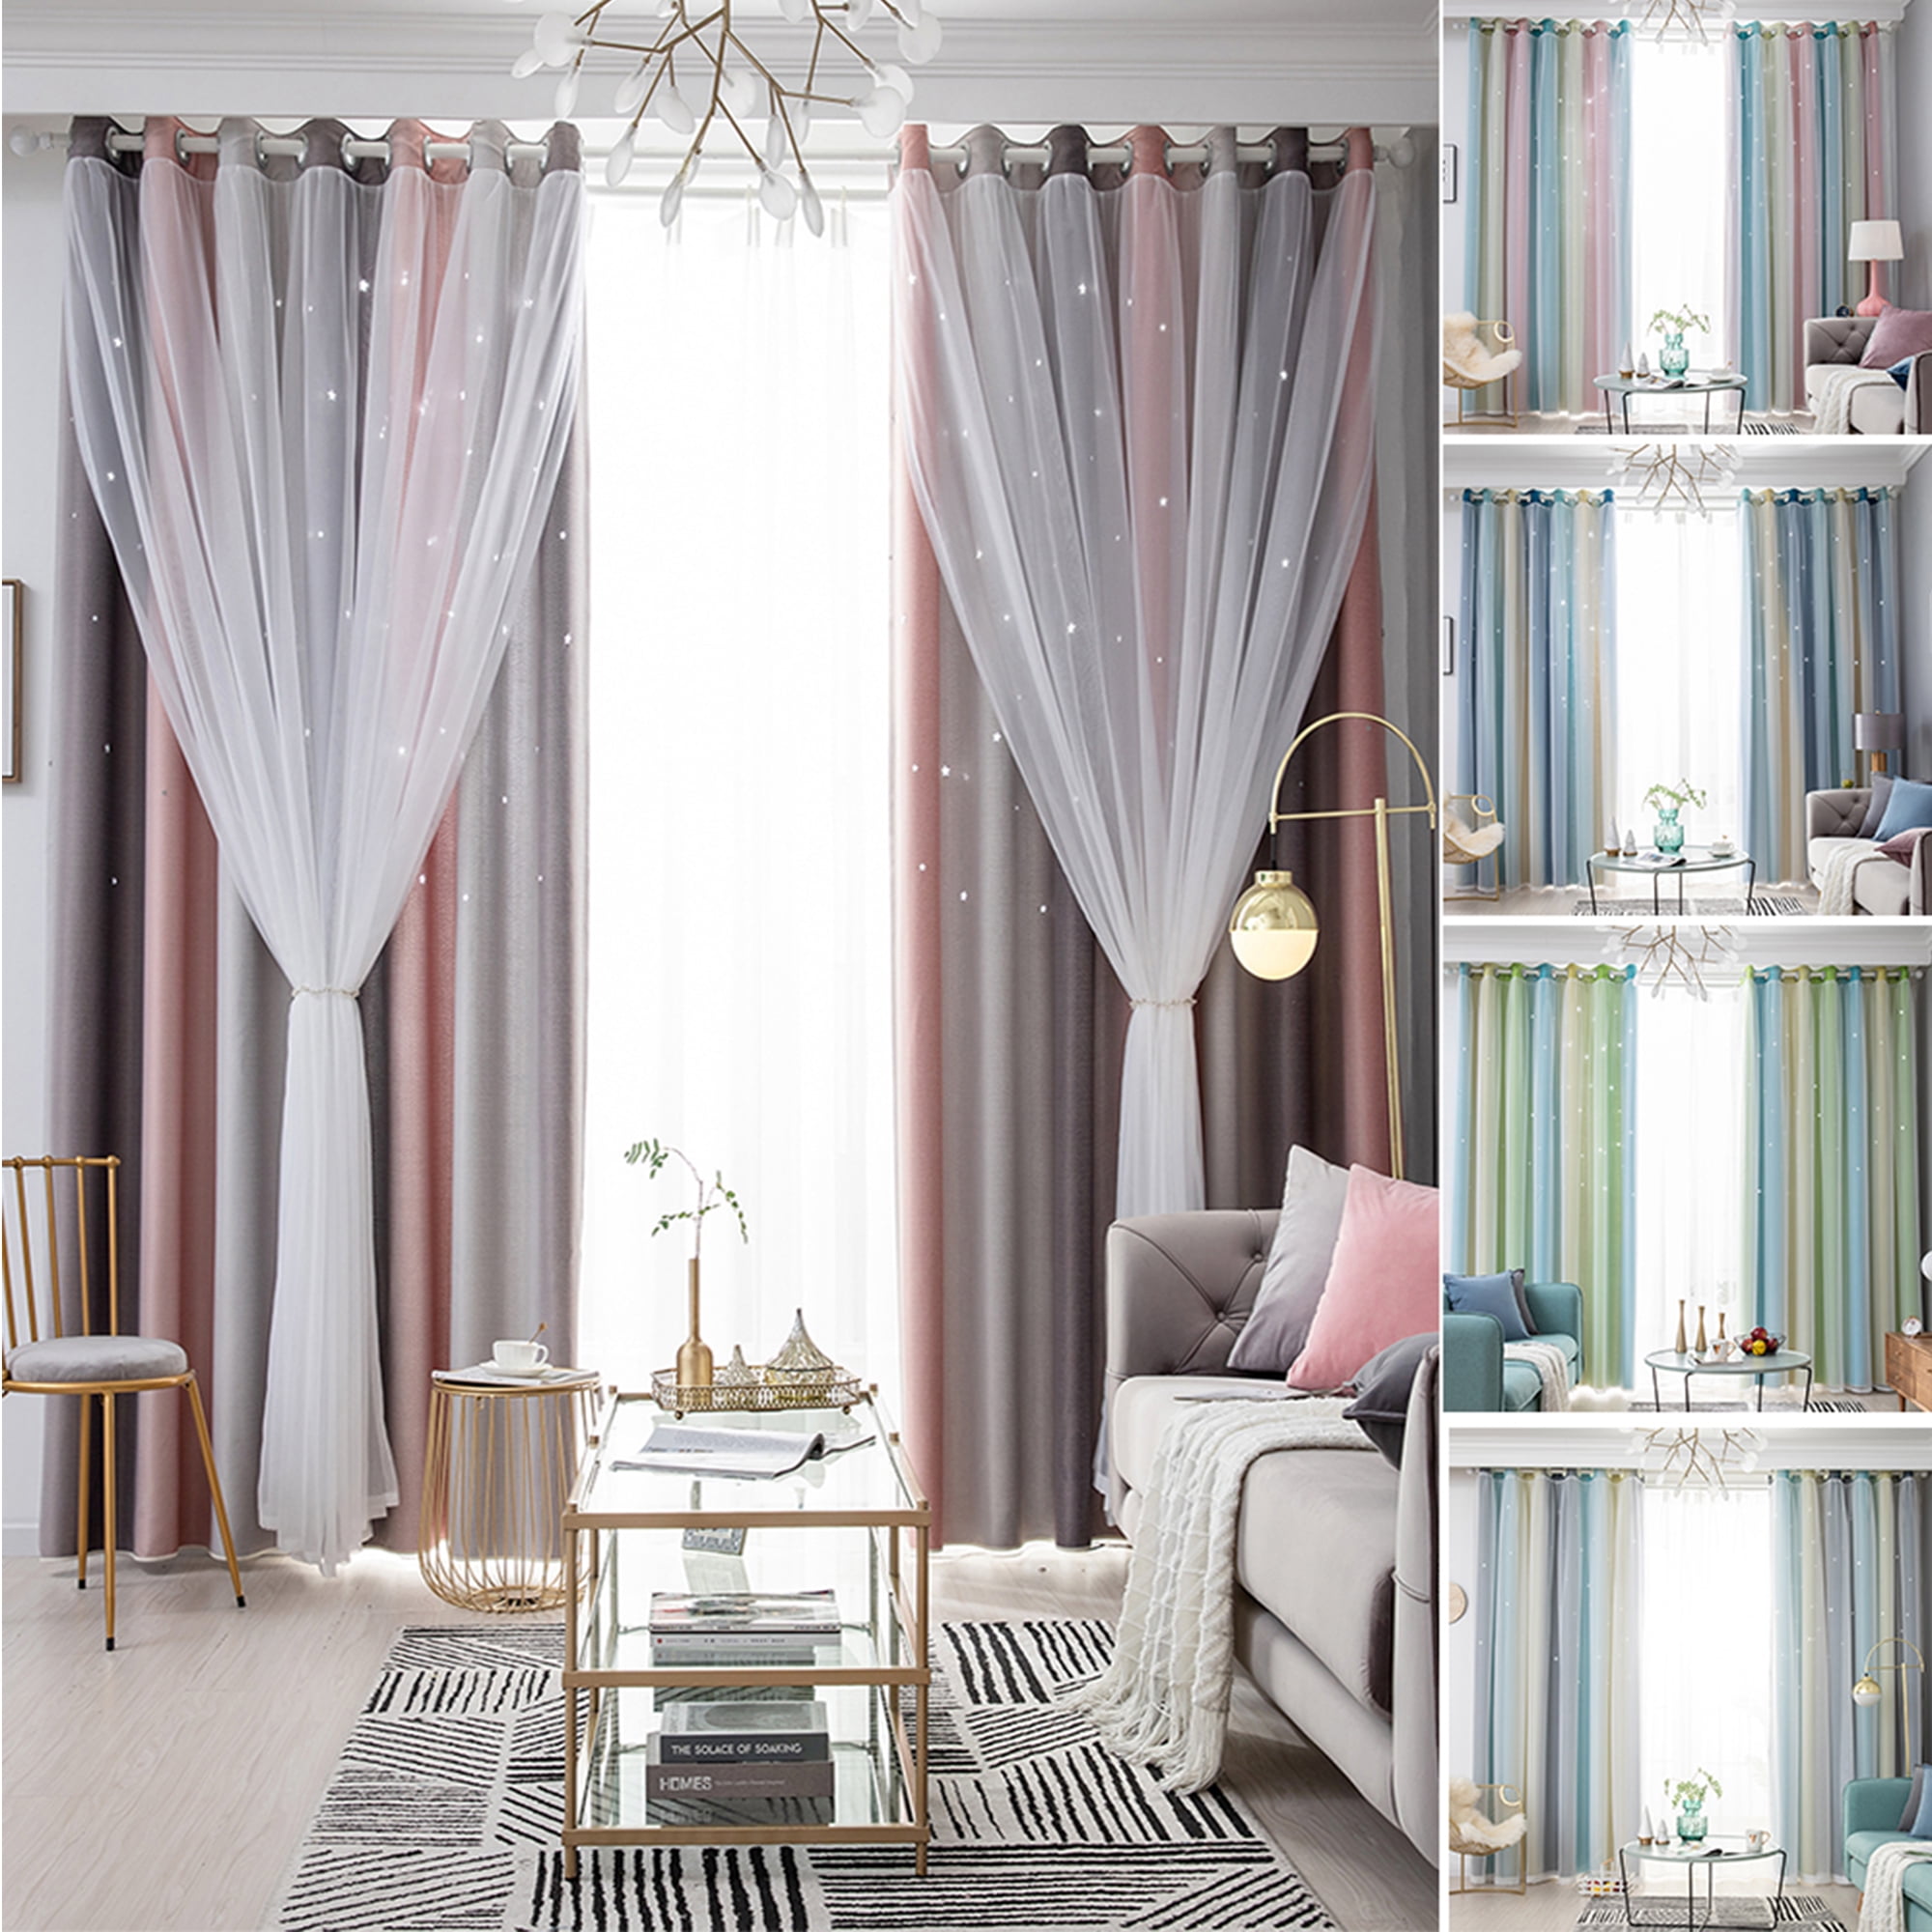 Romantic Eyelet Double-layer Tulle + Blackout Curtain Floor Starry Room